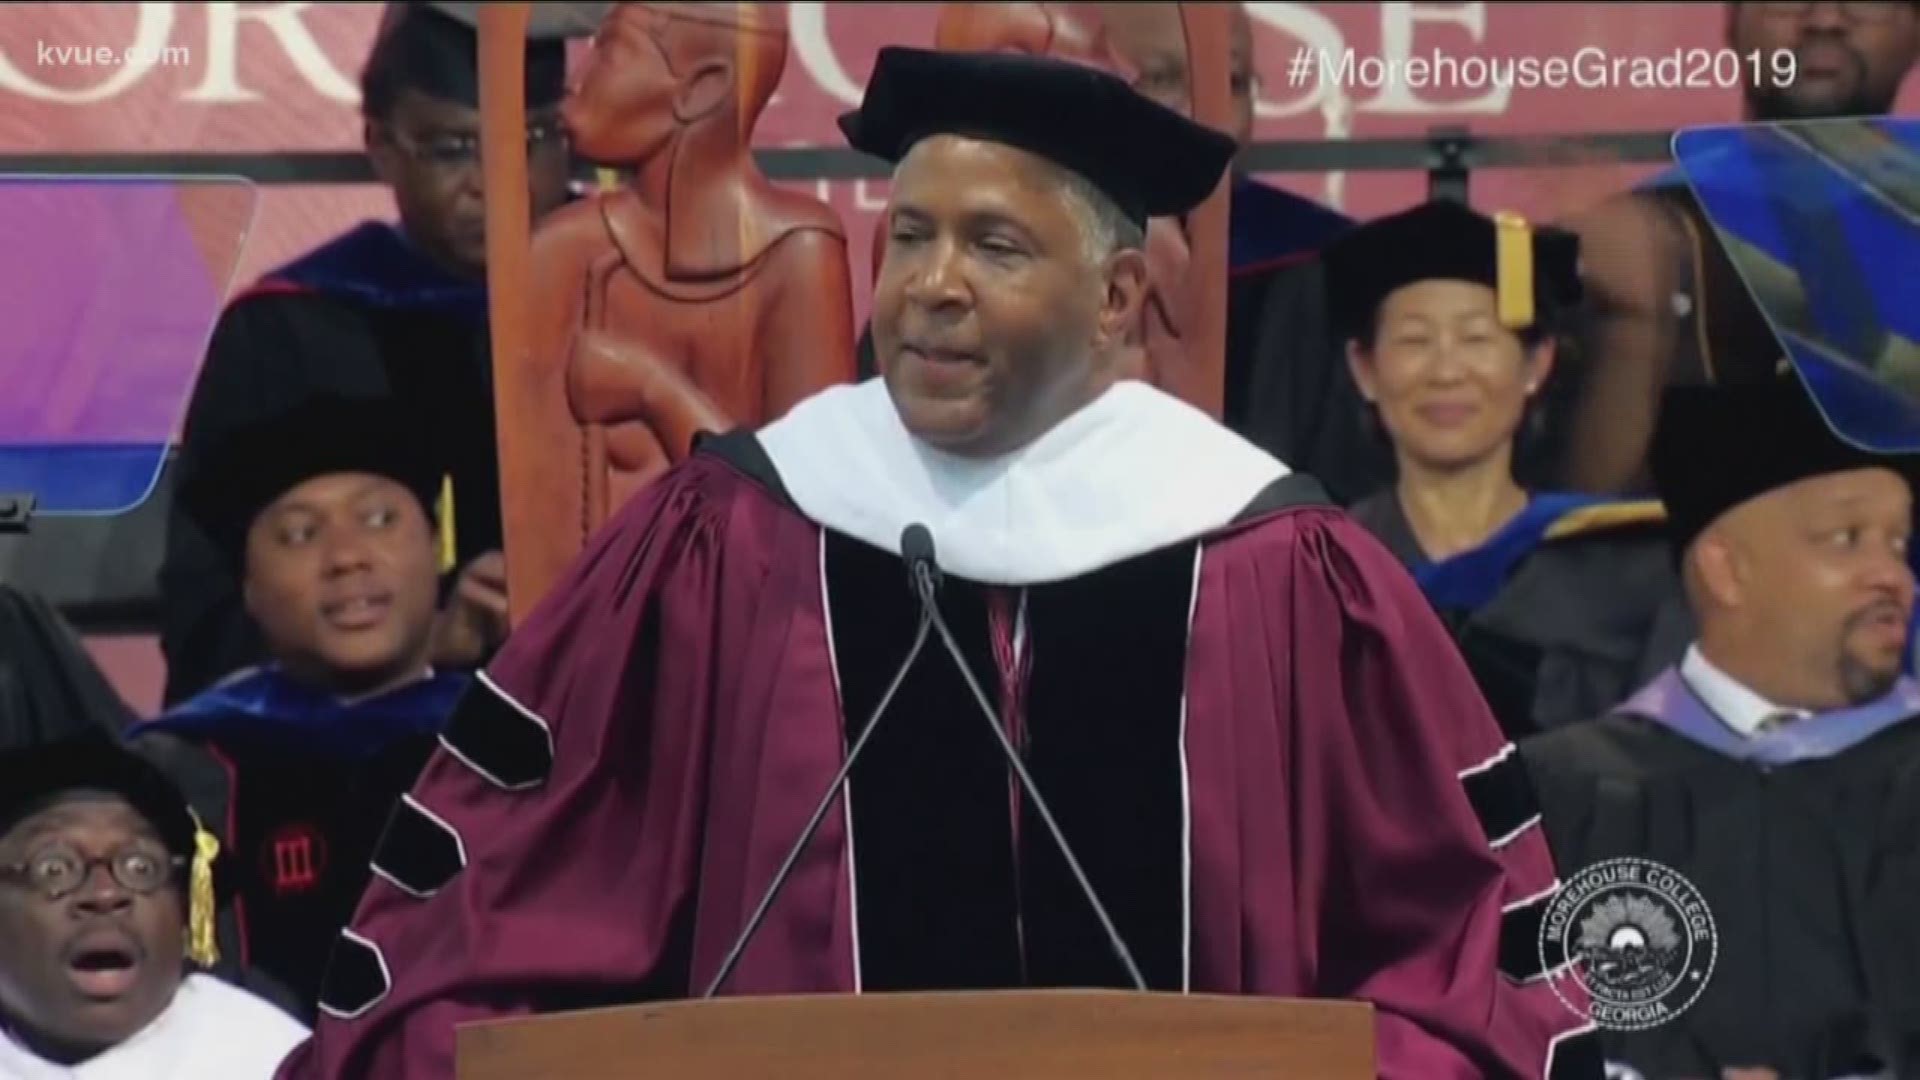 Billionaire Robert F. Smith gave a touching speech during a commencement ceremony at Morehouse College, surprising the entire graduating class that he will pay off all of their student loan debt.